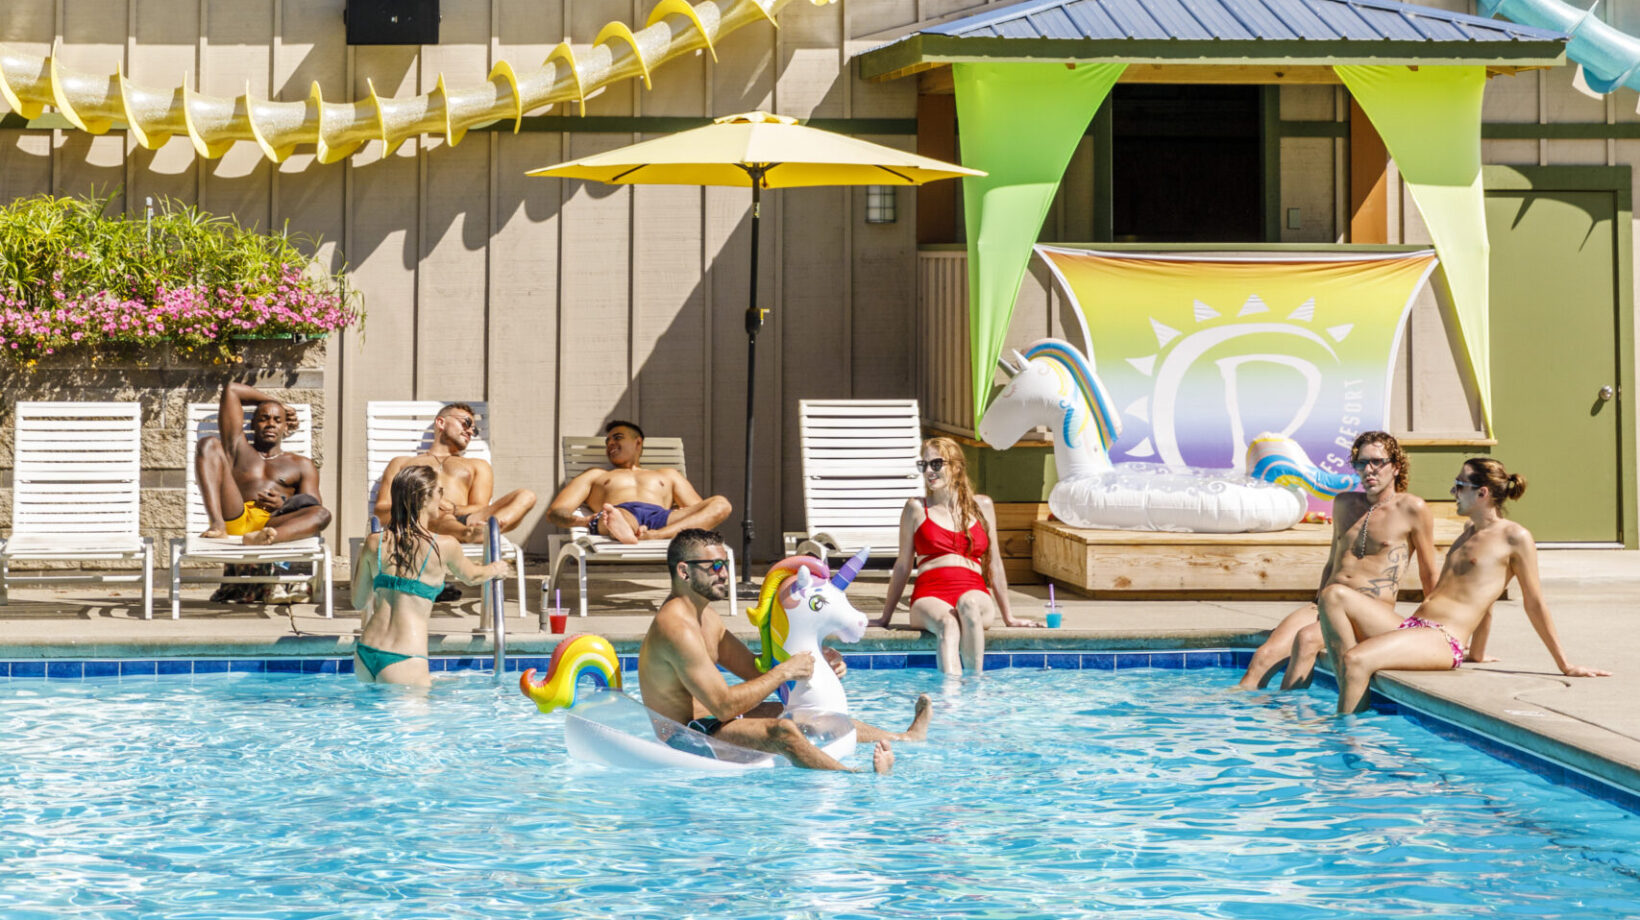 A group of people playing in a pool at The Dunes Resort. Some people are relaxing on the poolside while a man rides a float.